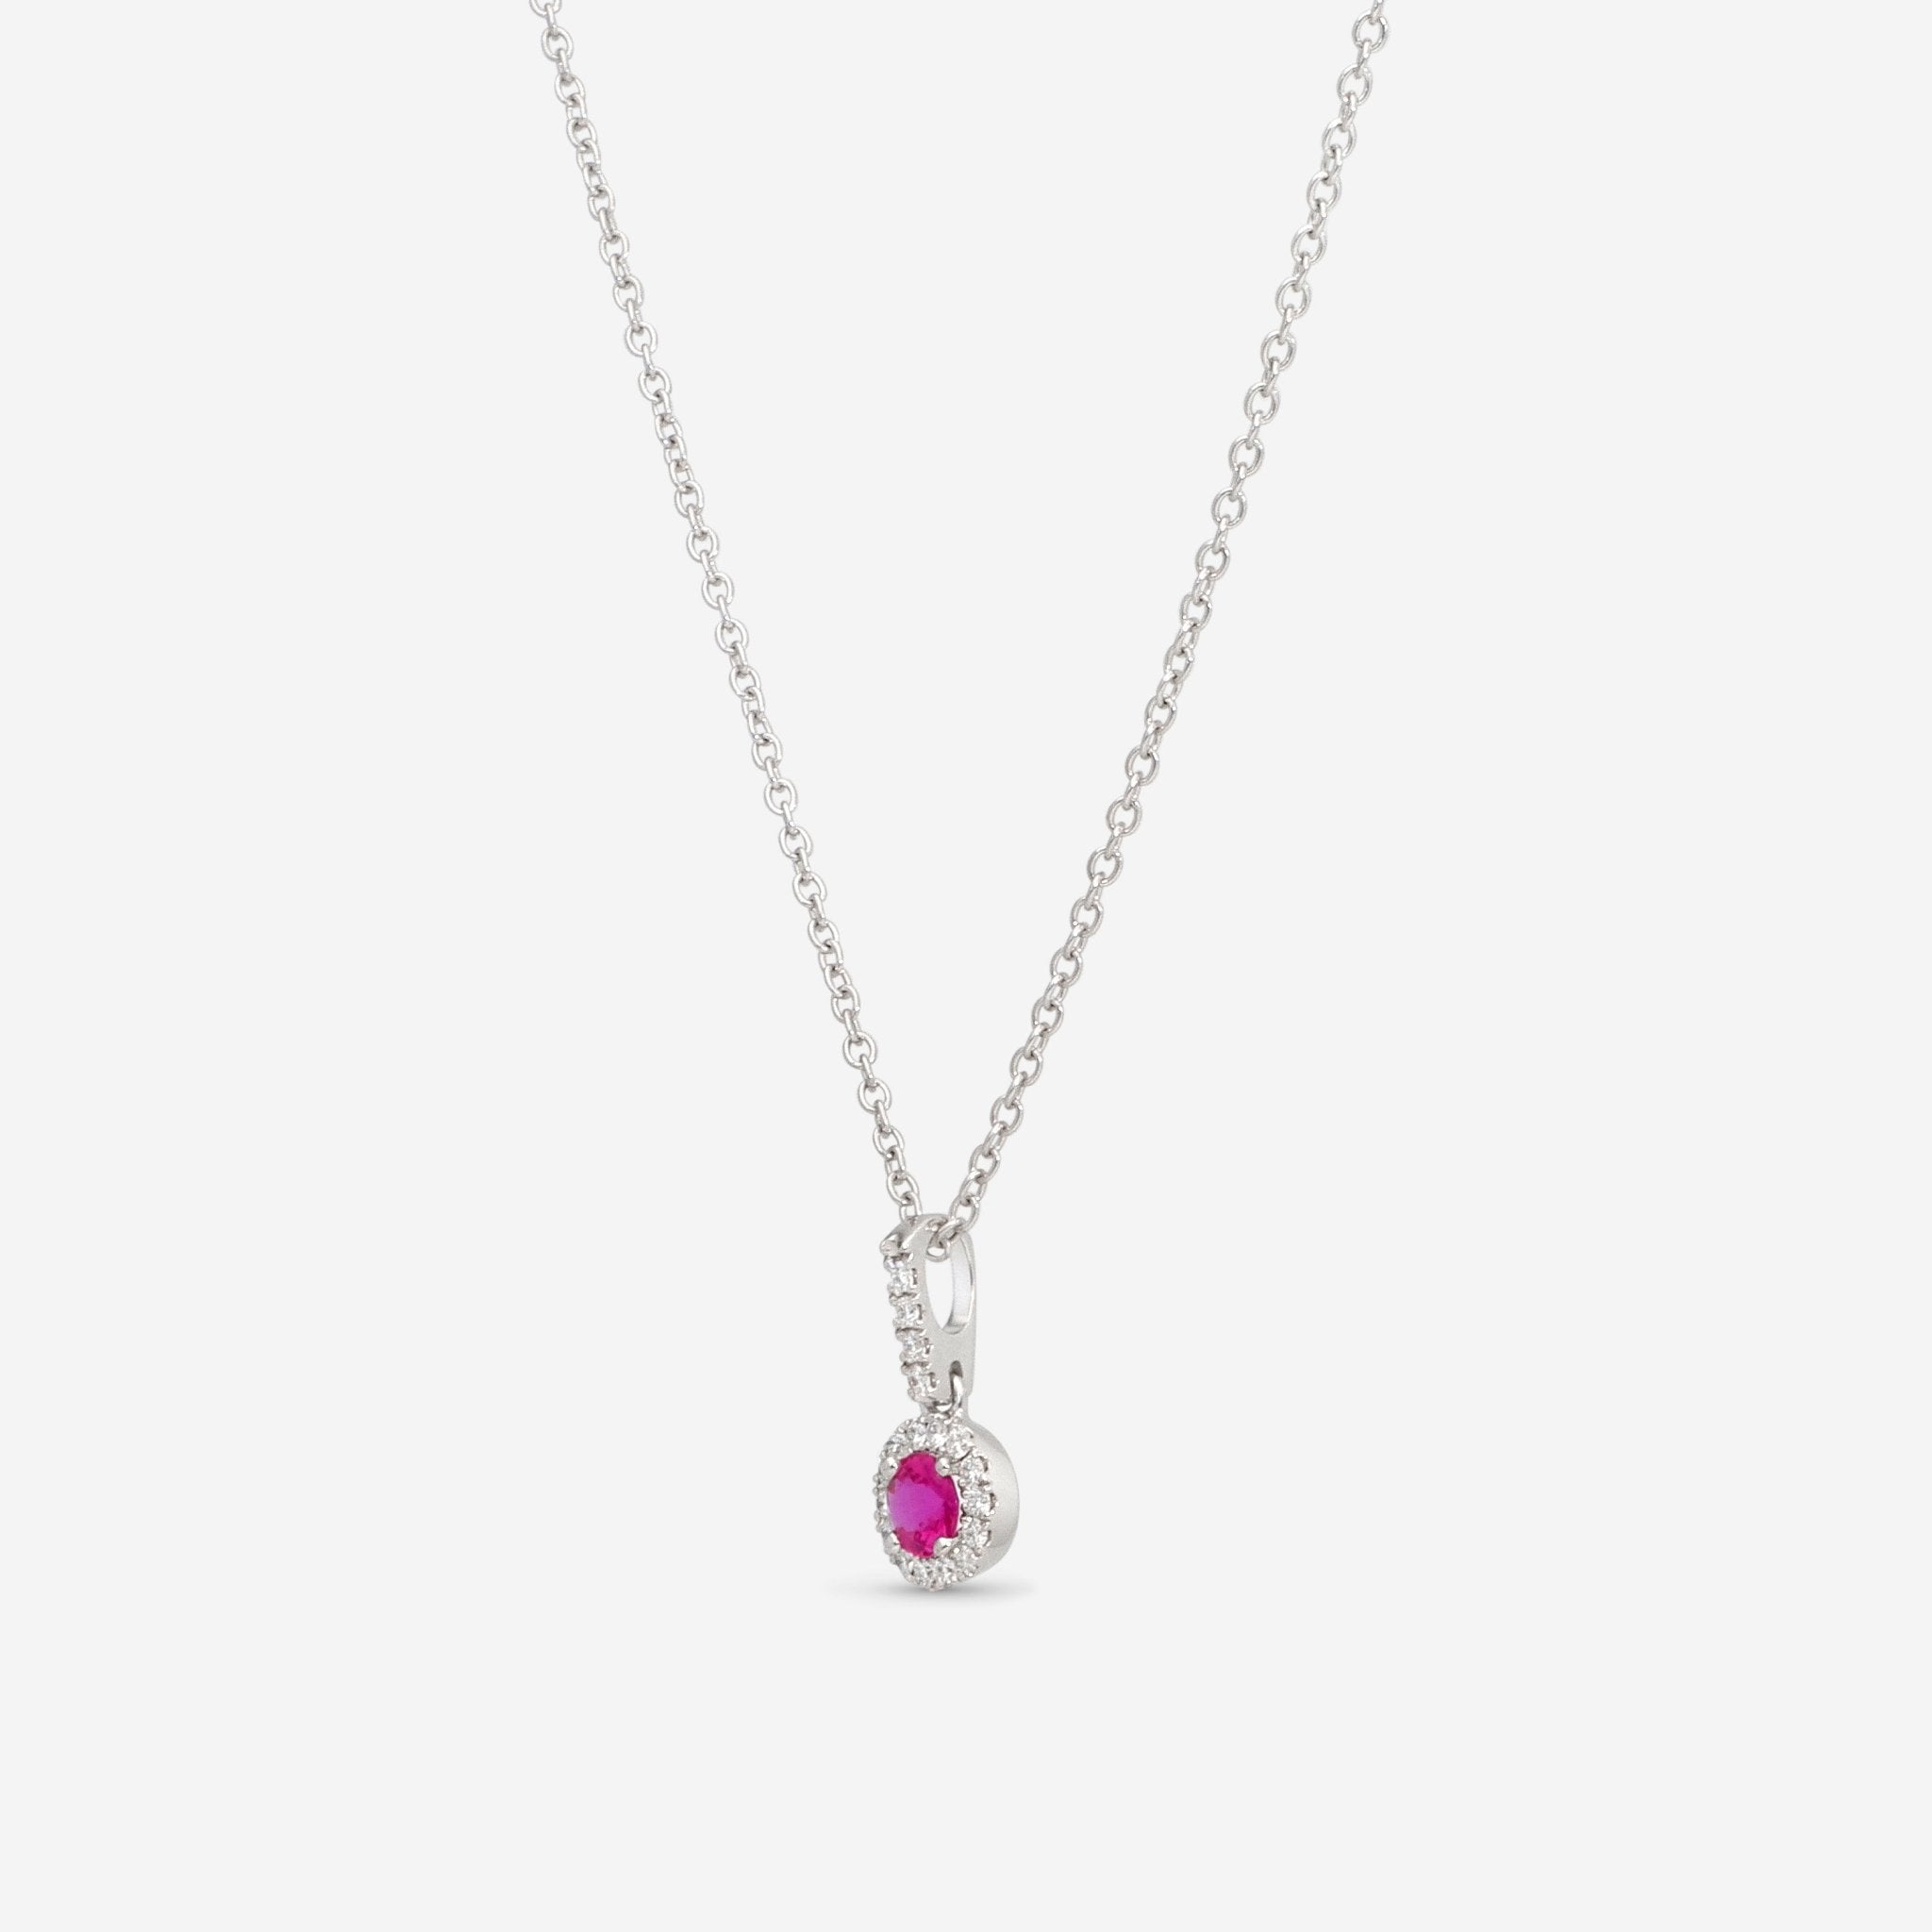 Ina Mar 14K White Gold Ruby and Diamond Drop Pendant PD - 073001 - Ruby - THE SOLIST - Ina Mar